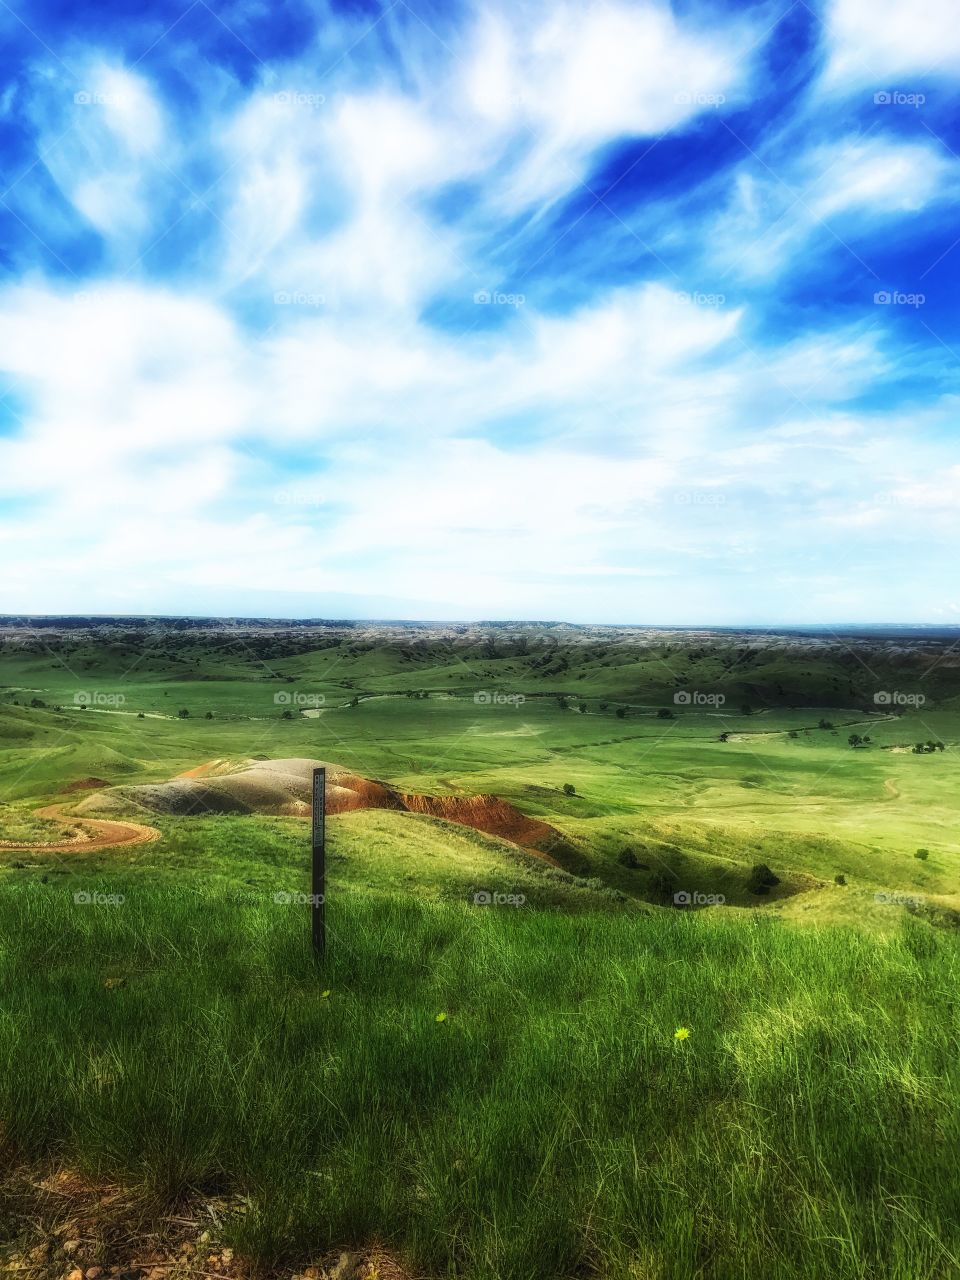 You can see for miles on the prairie in South Dakota